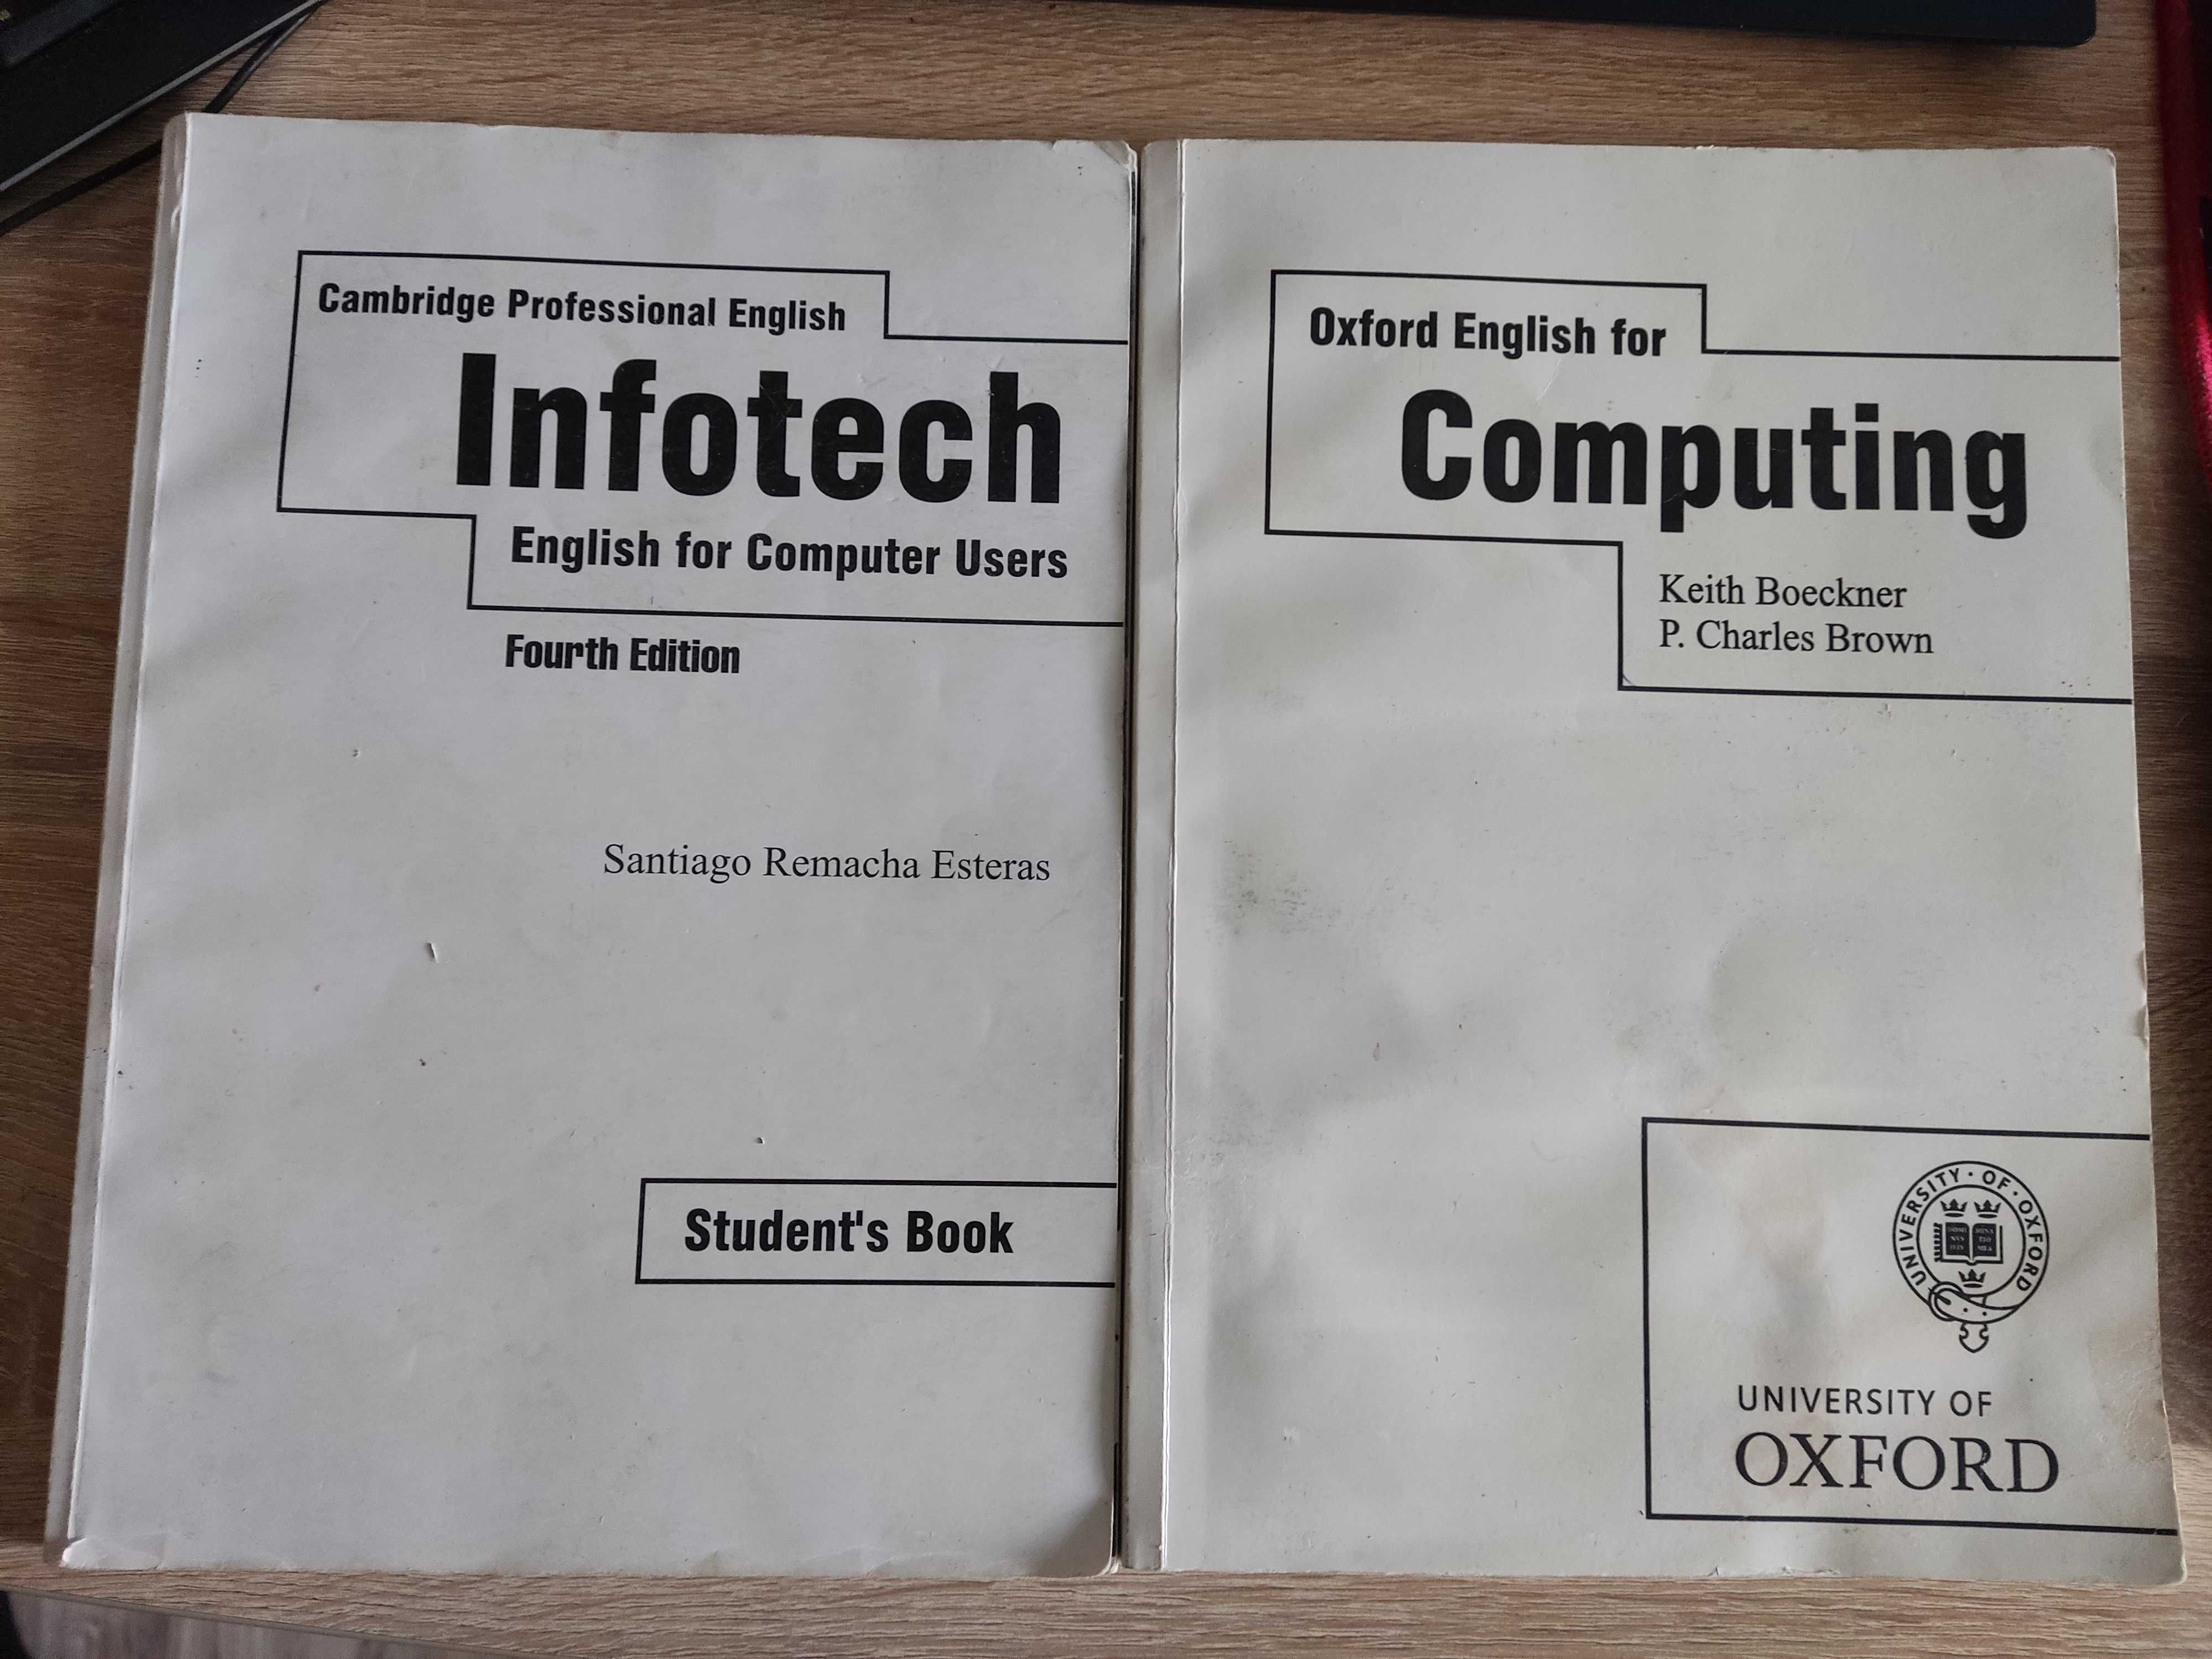 Oxford English for Computing (book and student’s book)